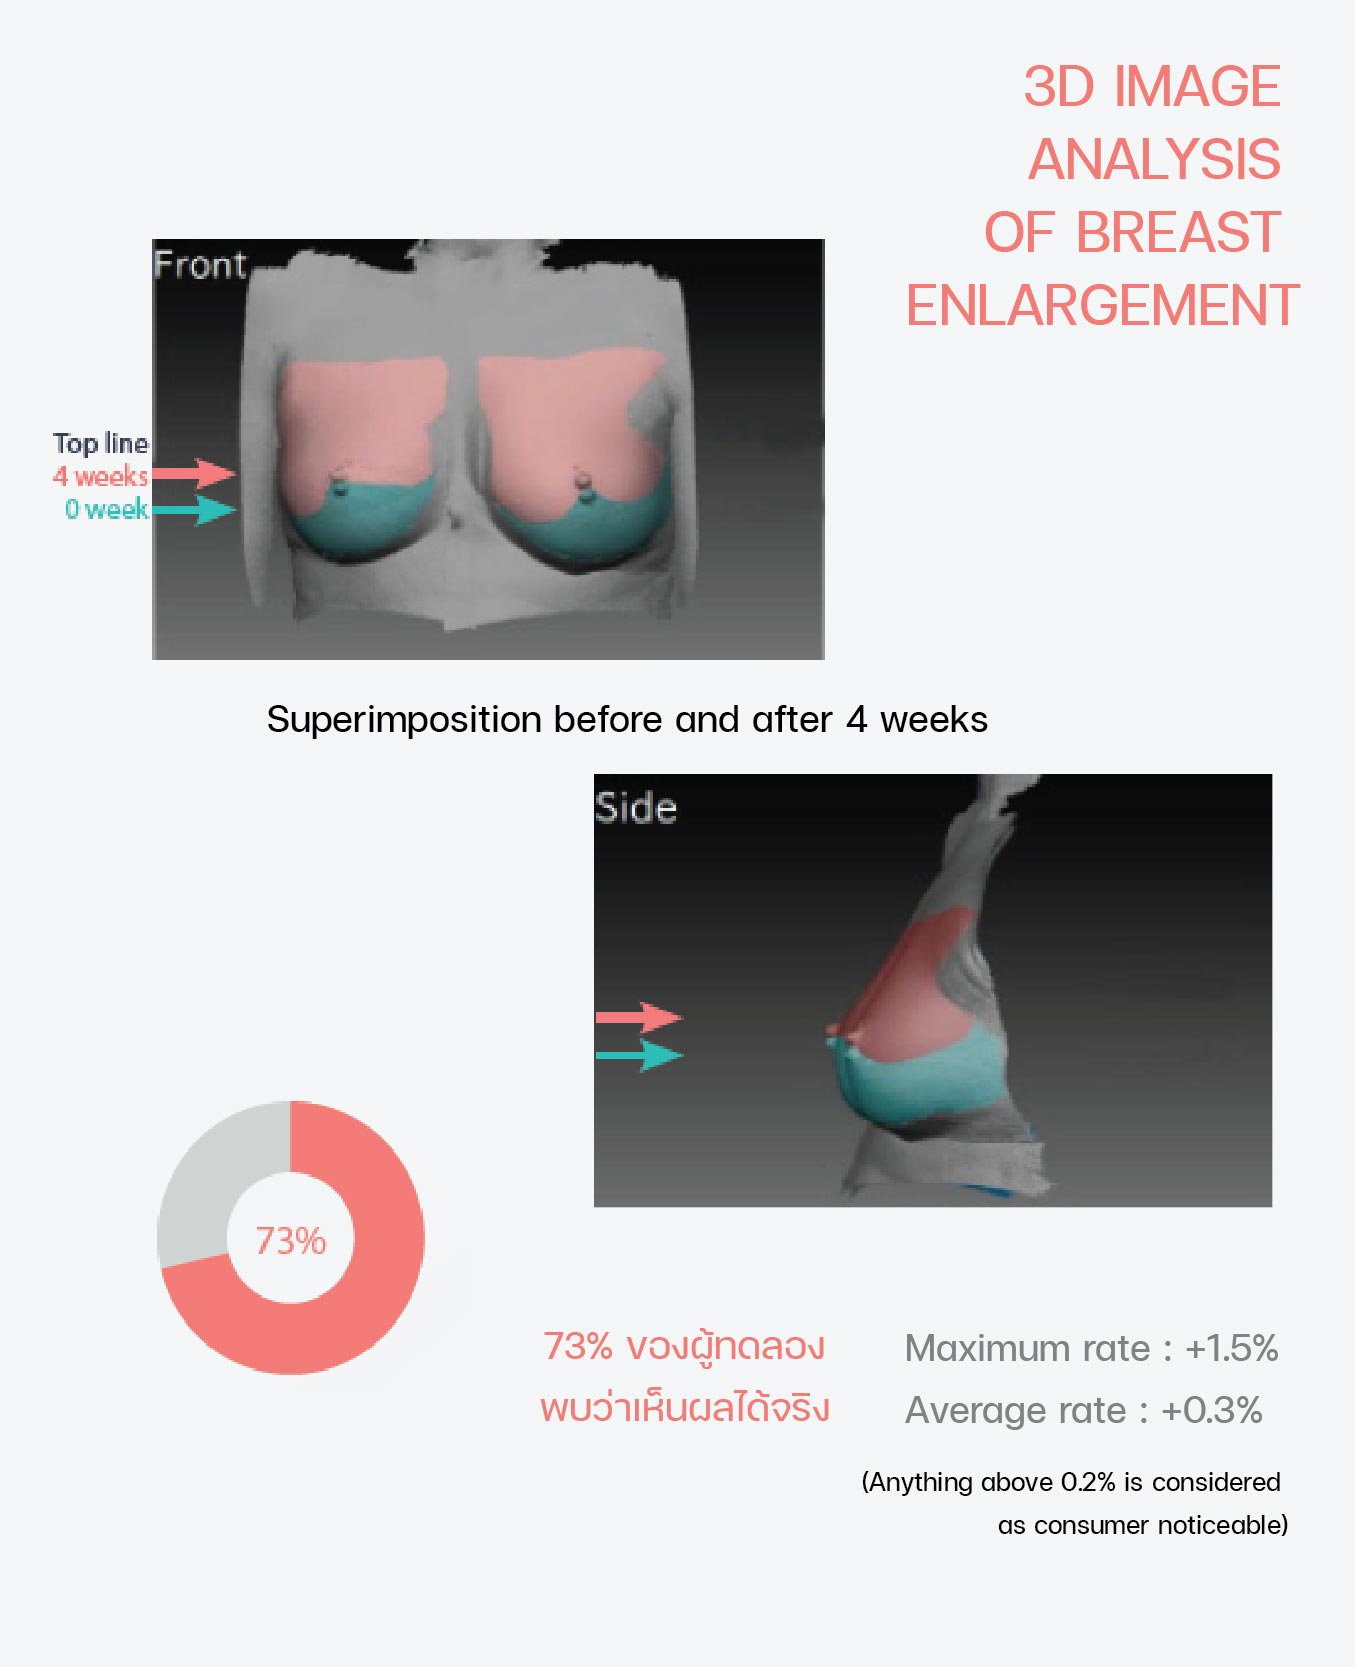 Breast Augmentation with IDEAL IMPLANTS